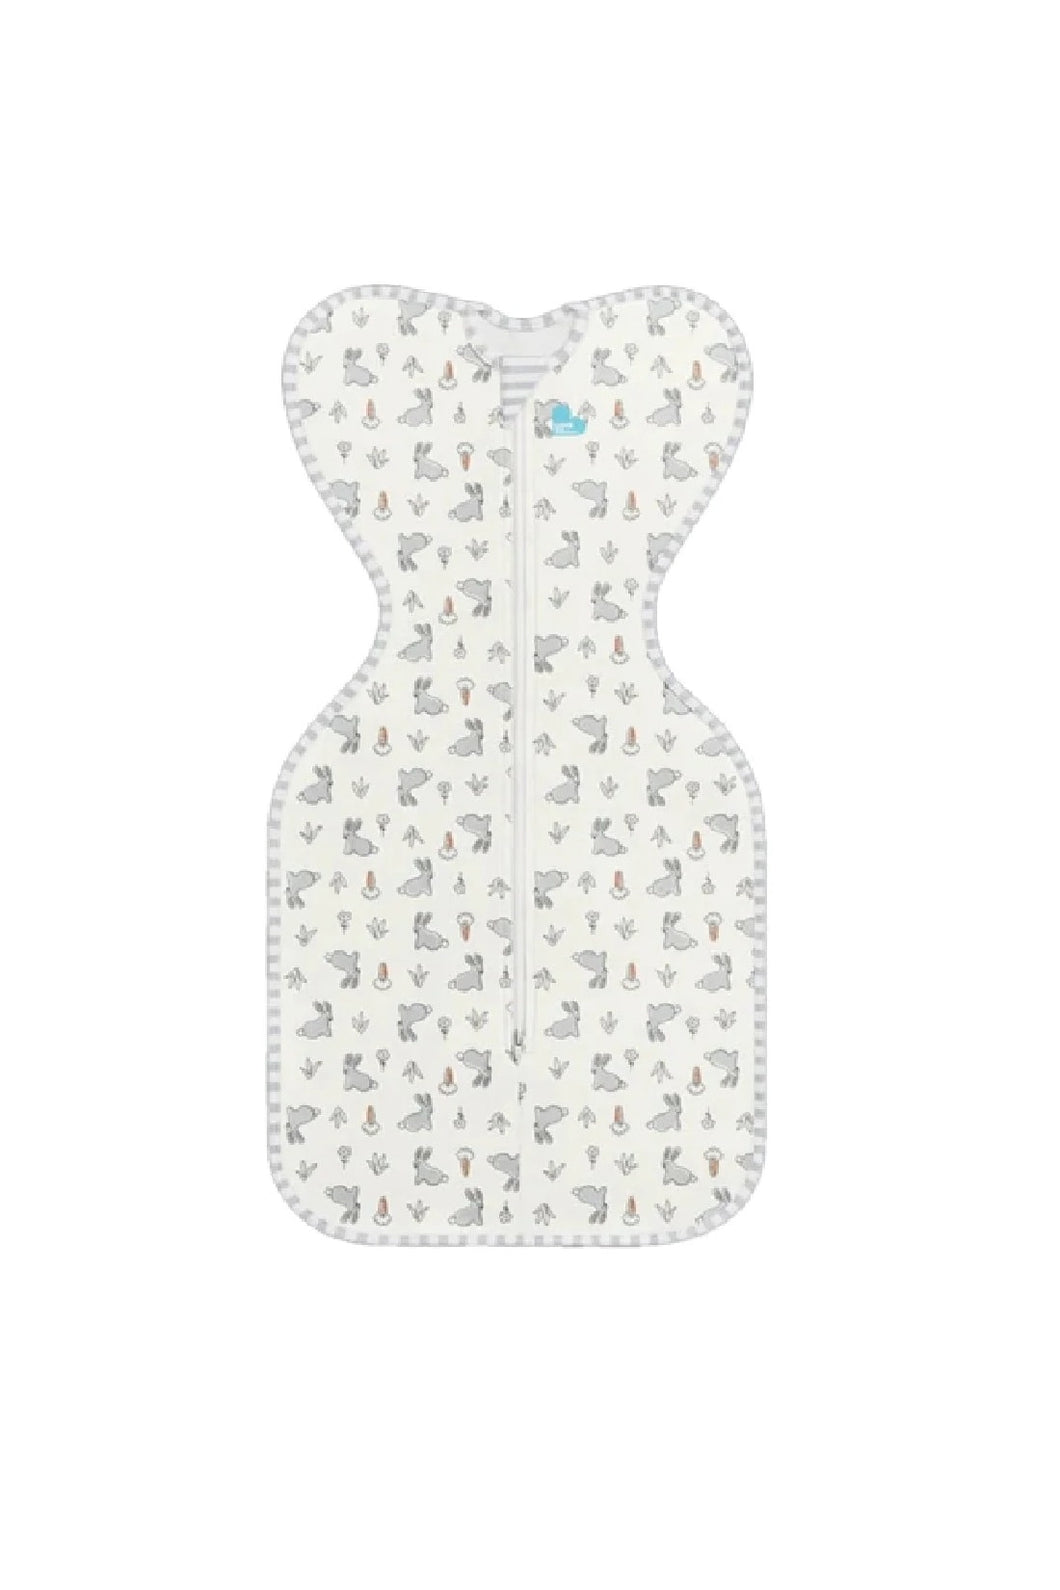 Love To Dream Swaddle Up Original Designer Collection Bunny 1